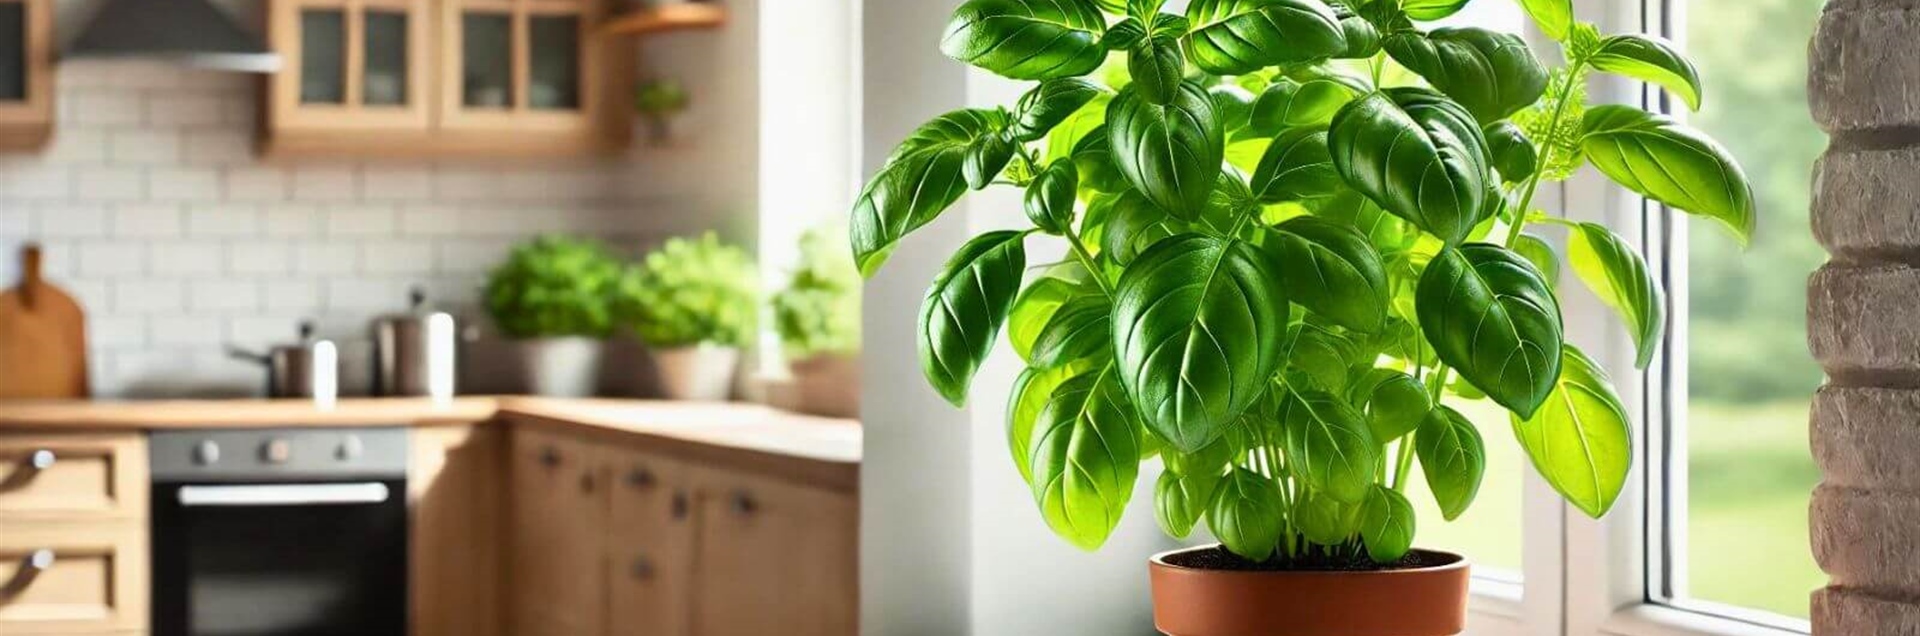 How to grow basil at home